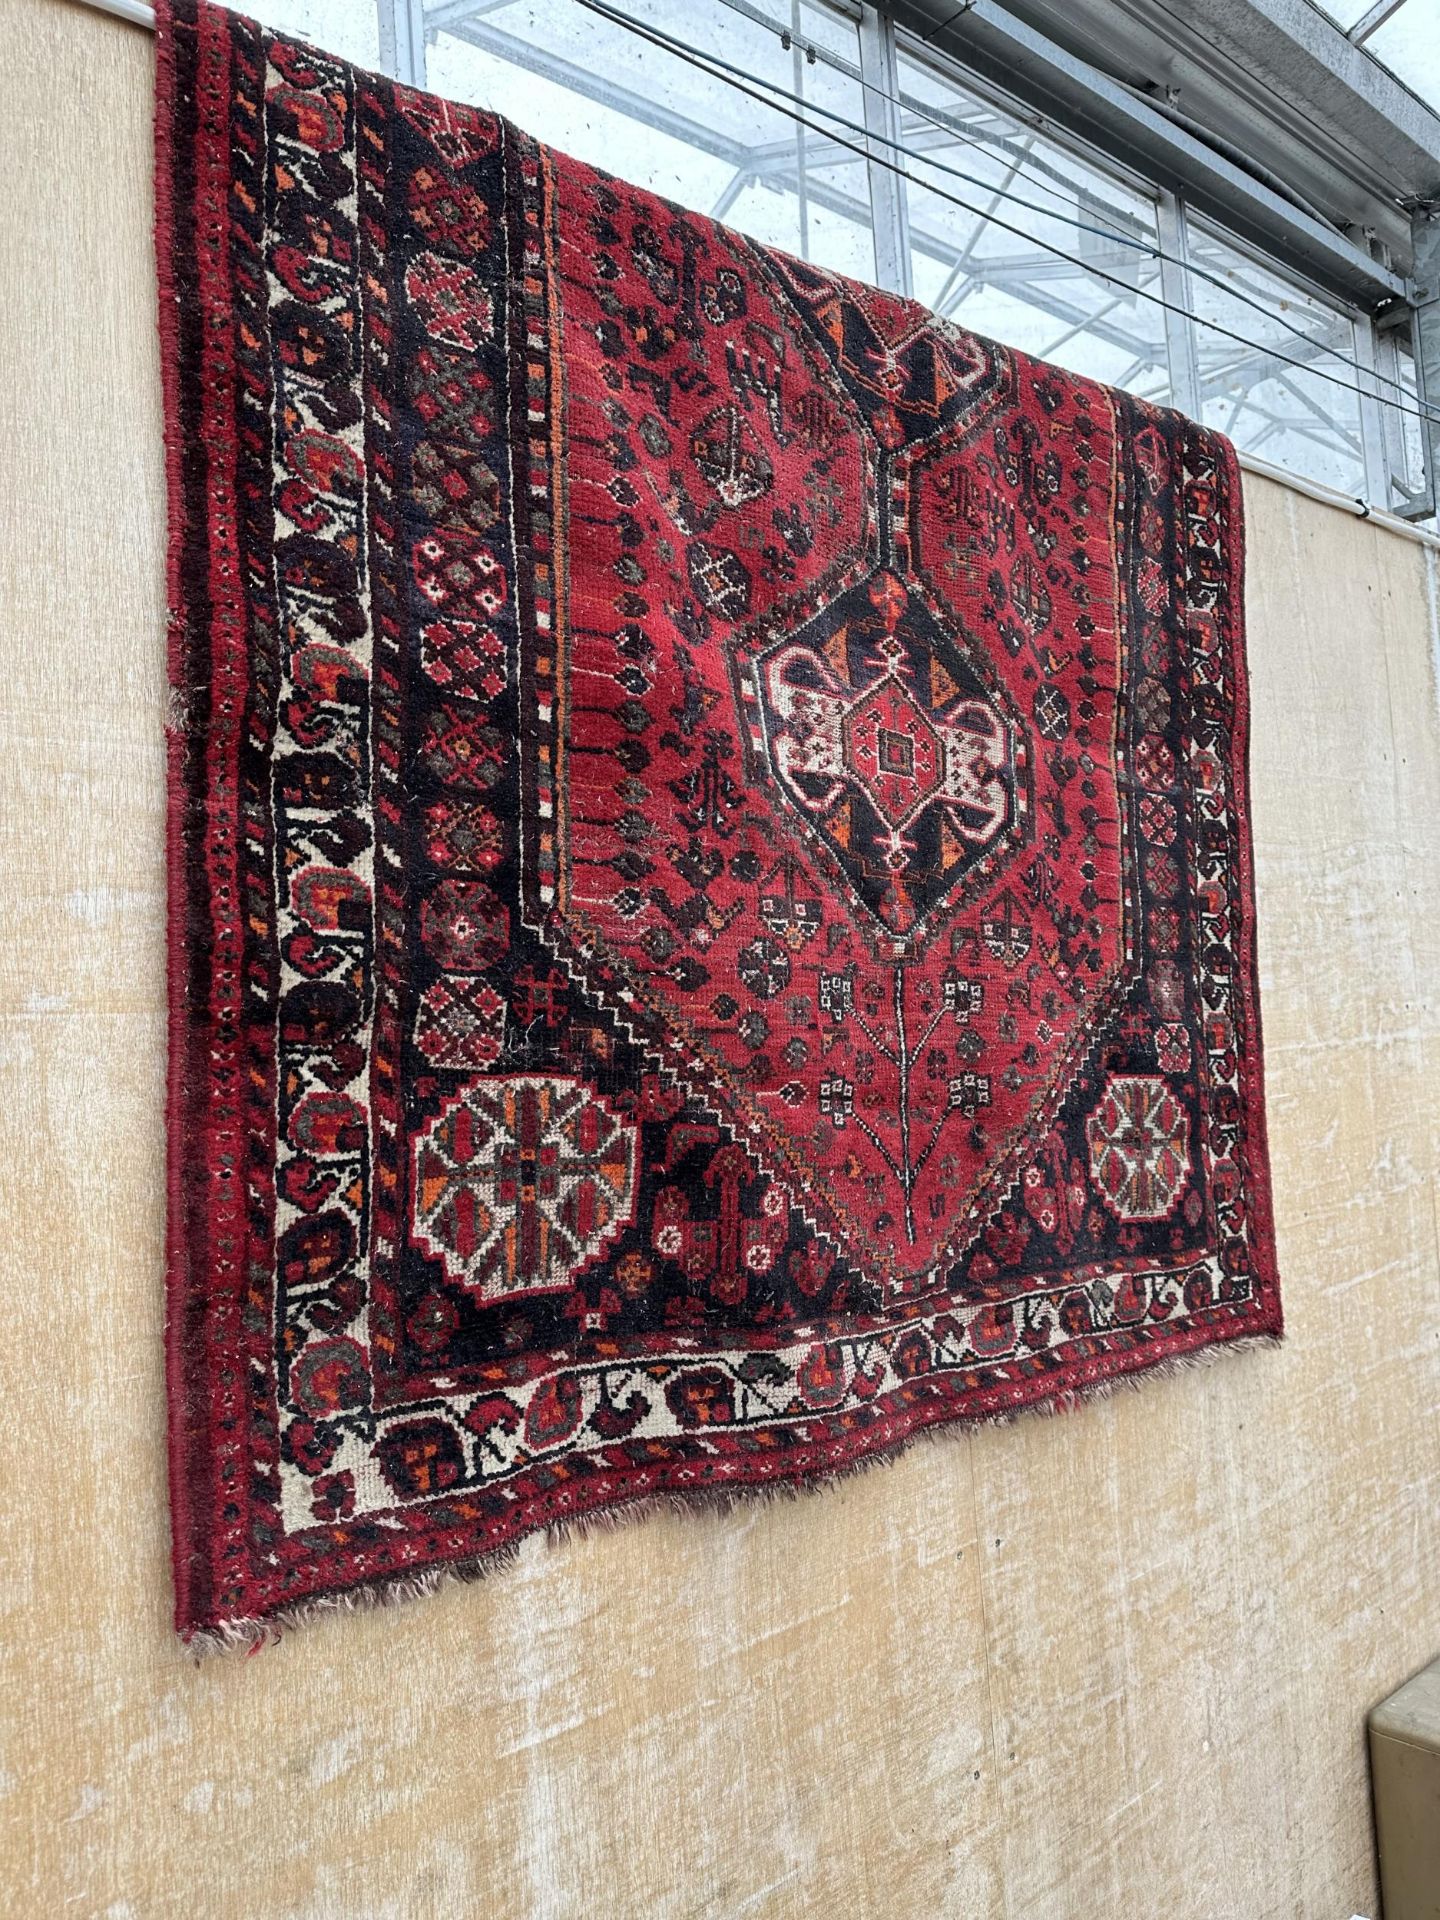 A RED PATTERNED FRINGED RUG